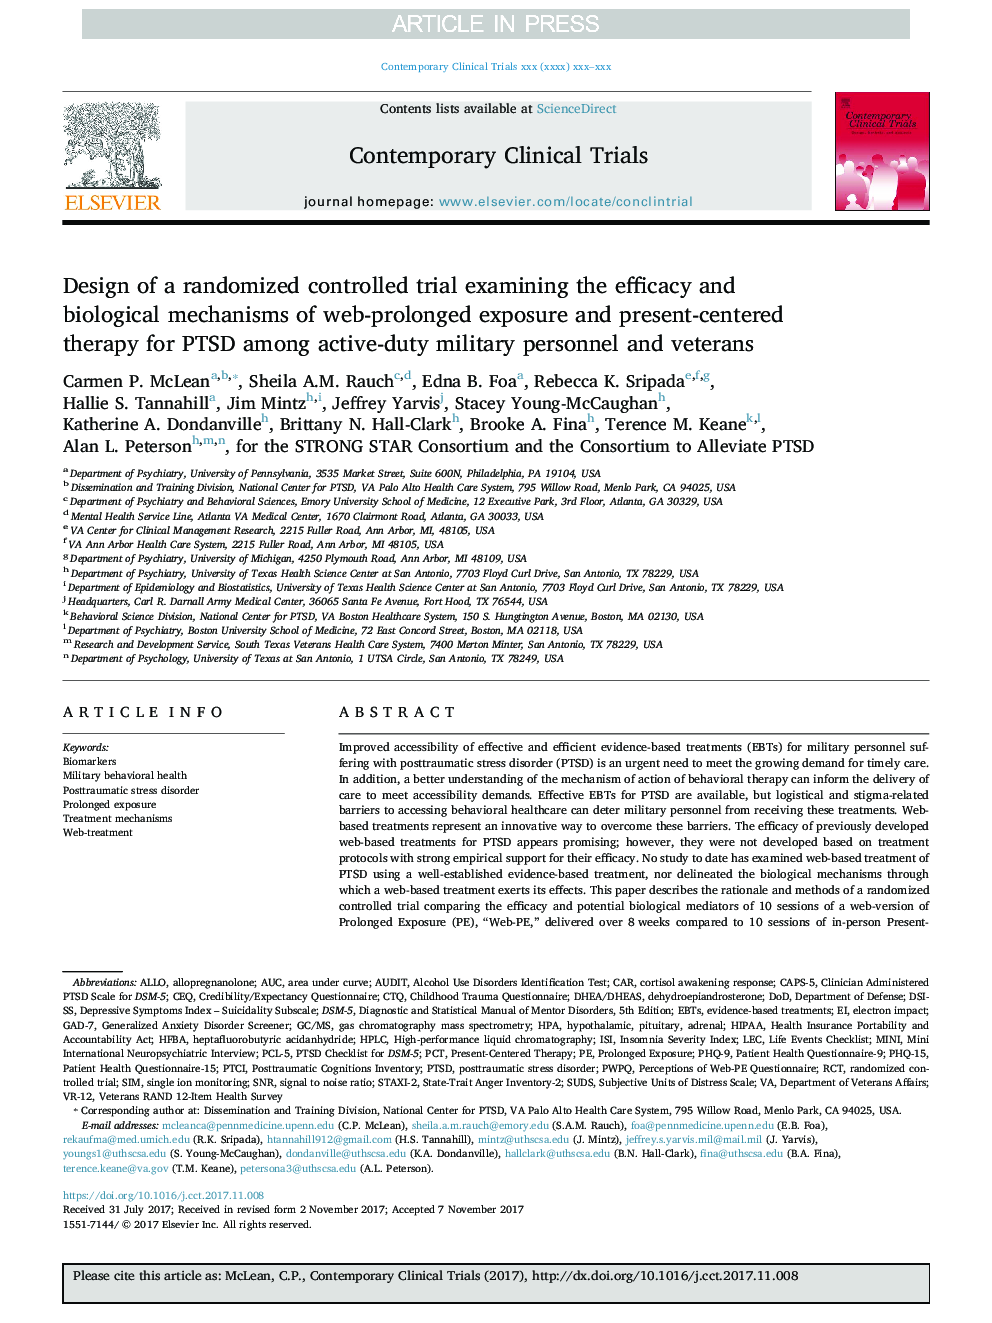 Design of a randomized controlled trial examining the efficacy and biological mechanisms of web-prolonged exposure and present-centered therapy for PTSD among active-duty military personnel and veterans